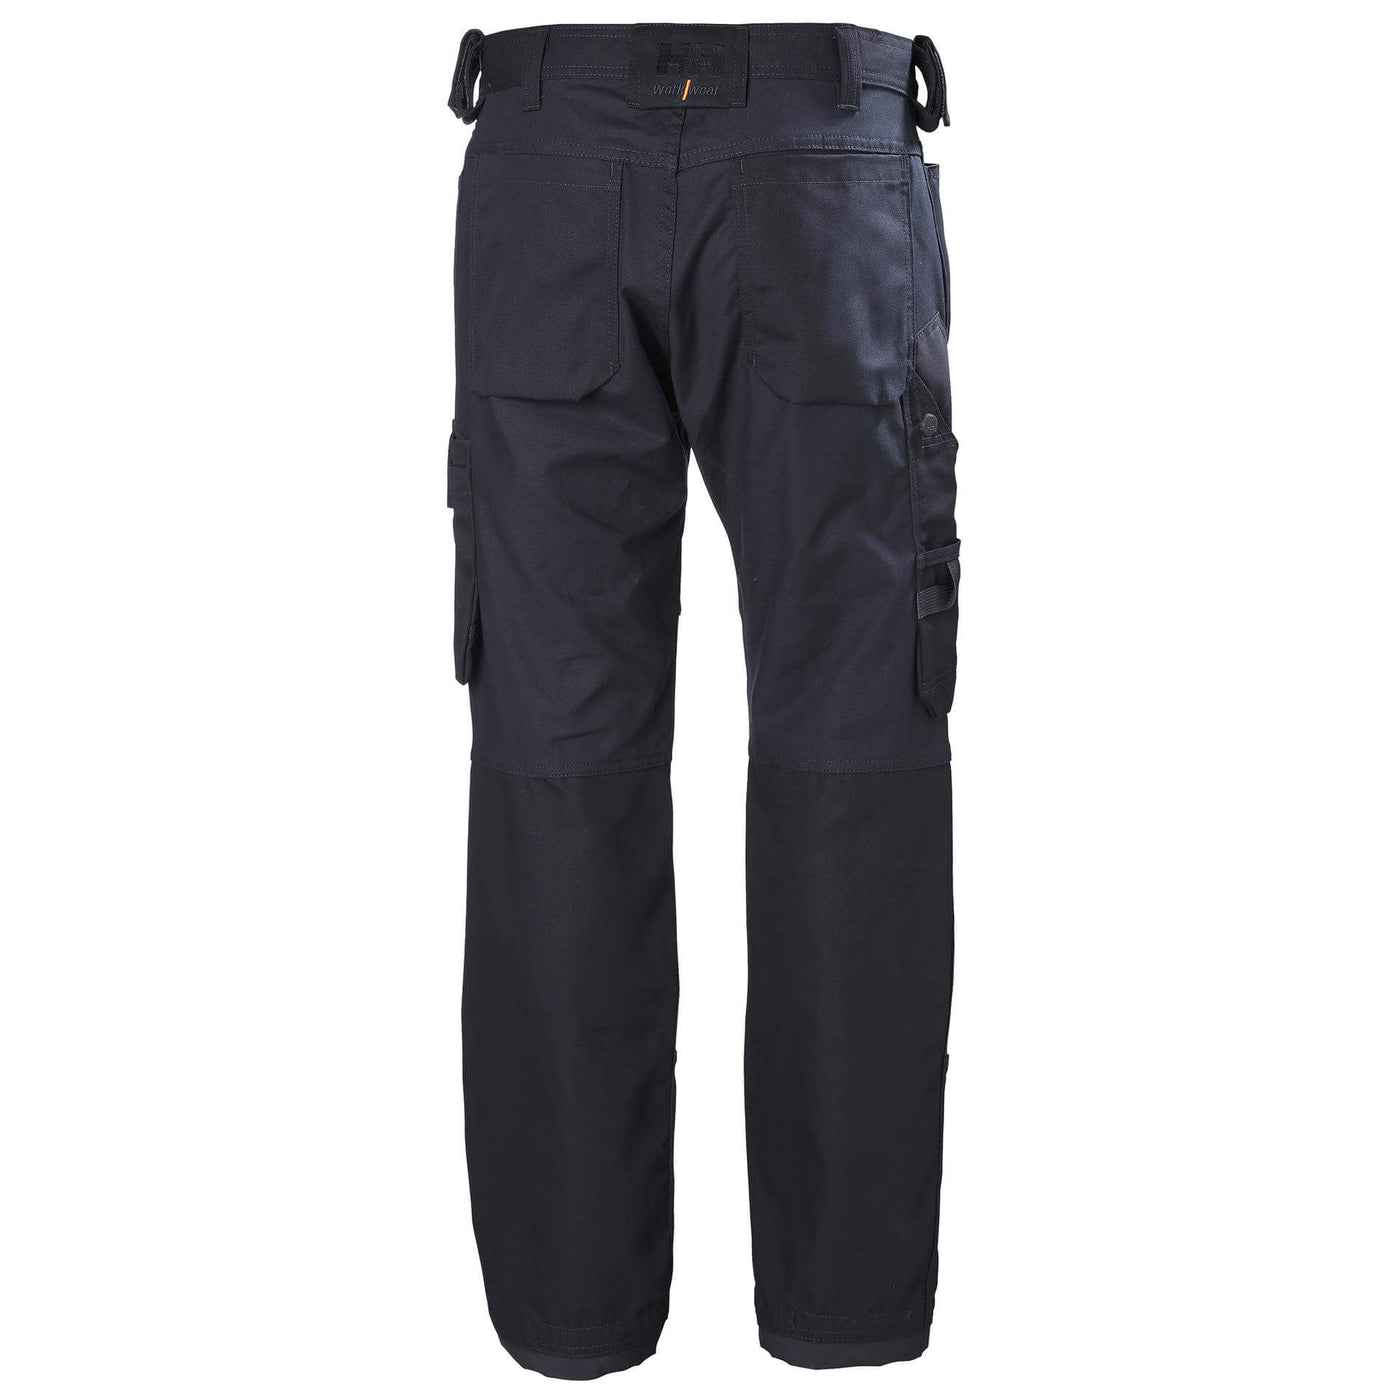 Xpert Core Stretch Work Trousers - McLaughlins